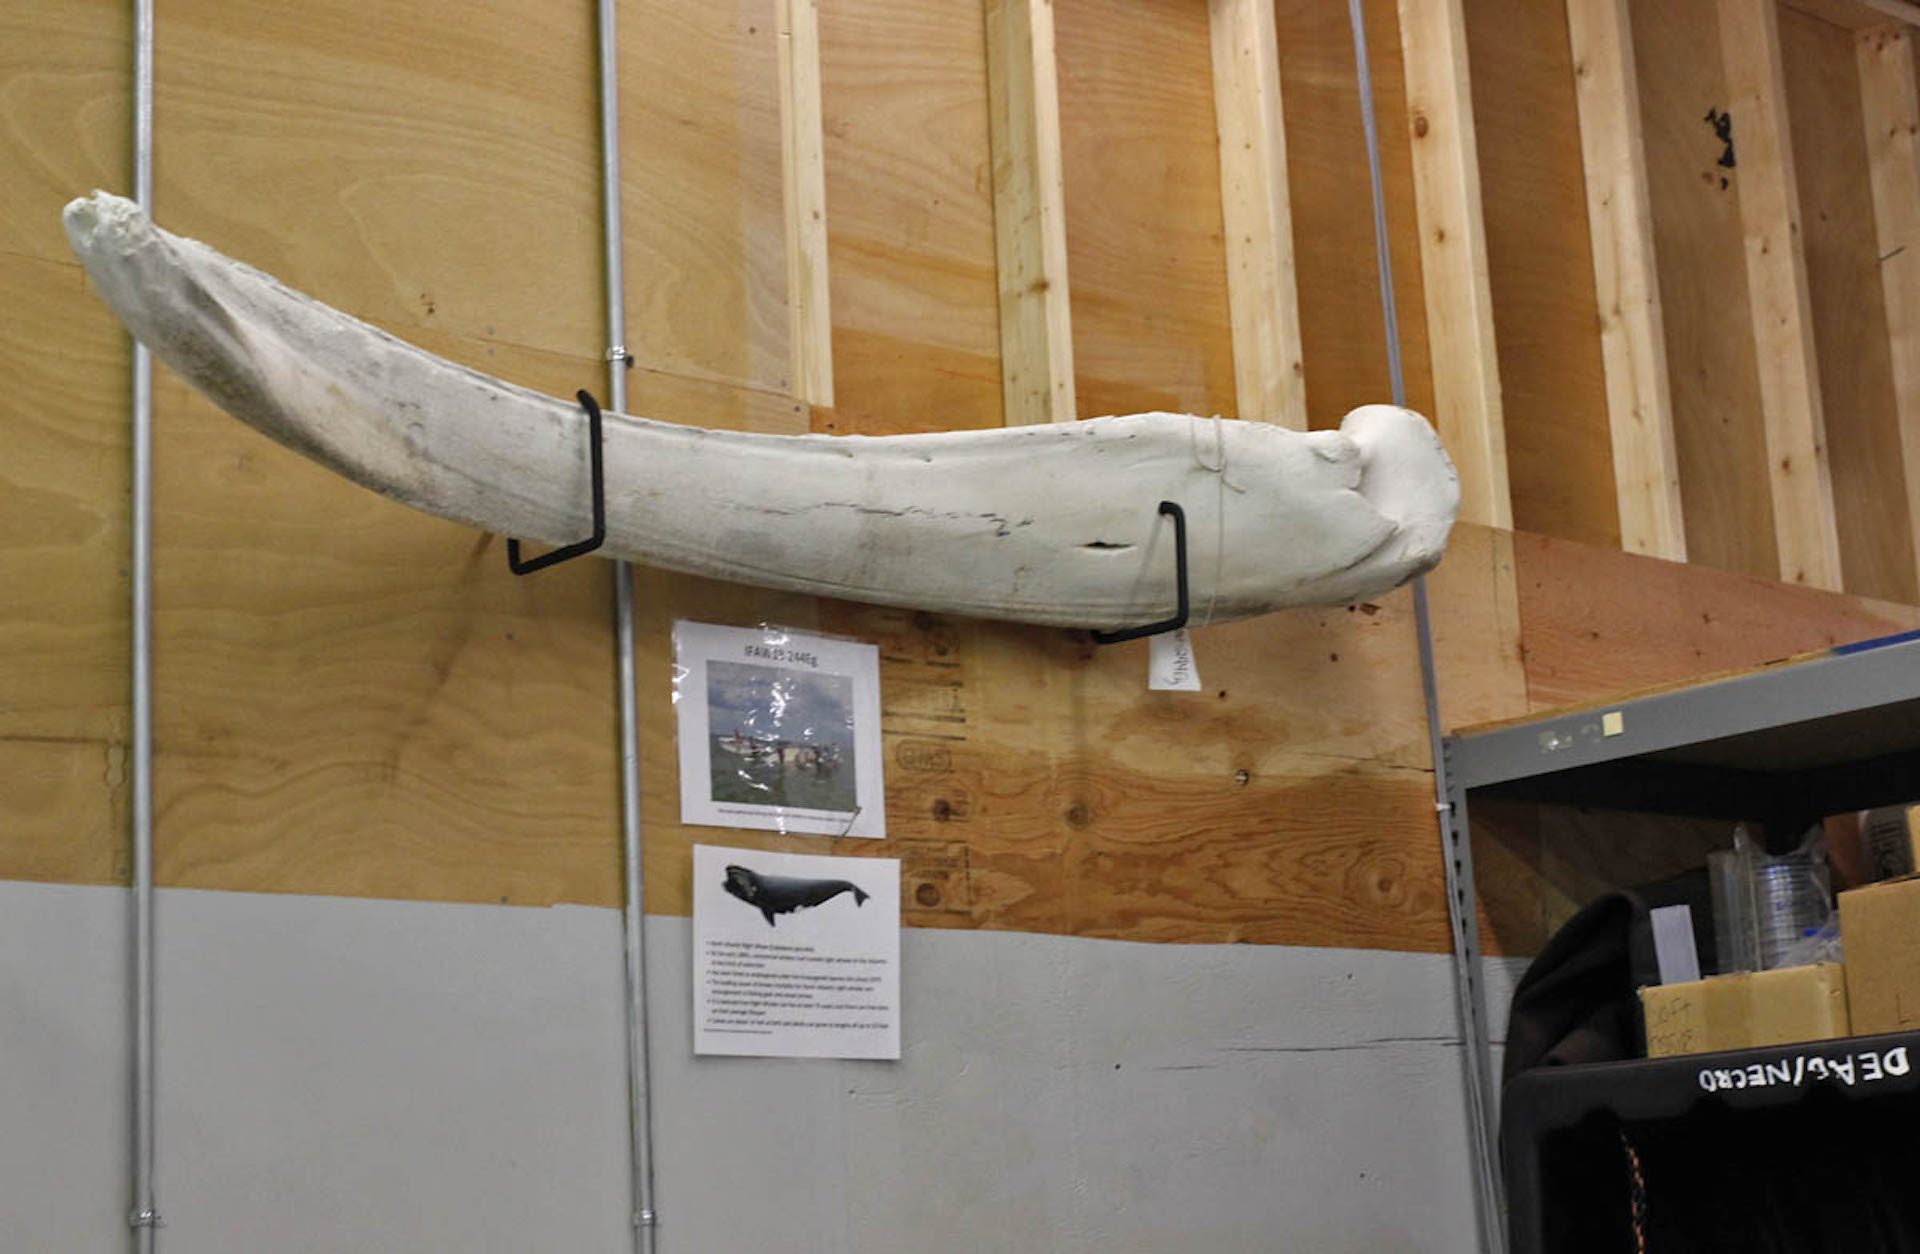 IFAW responds to marine mammals in trouble, and when they’re too late, they try to determine a cause of death. Pictured is the lower mandible of a one-and-a-half year old North Atlantic right whale that died from a fishing gear entanglement.